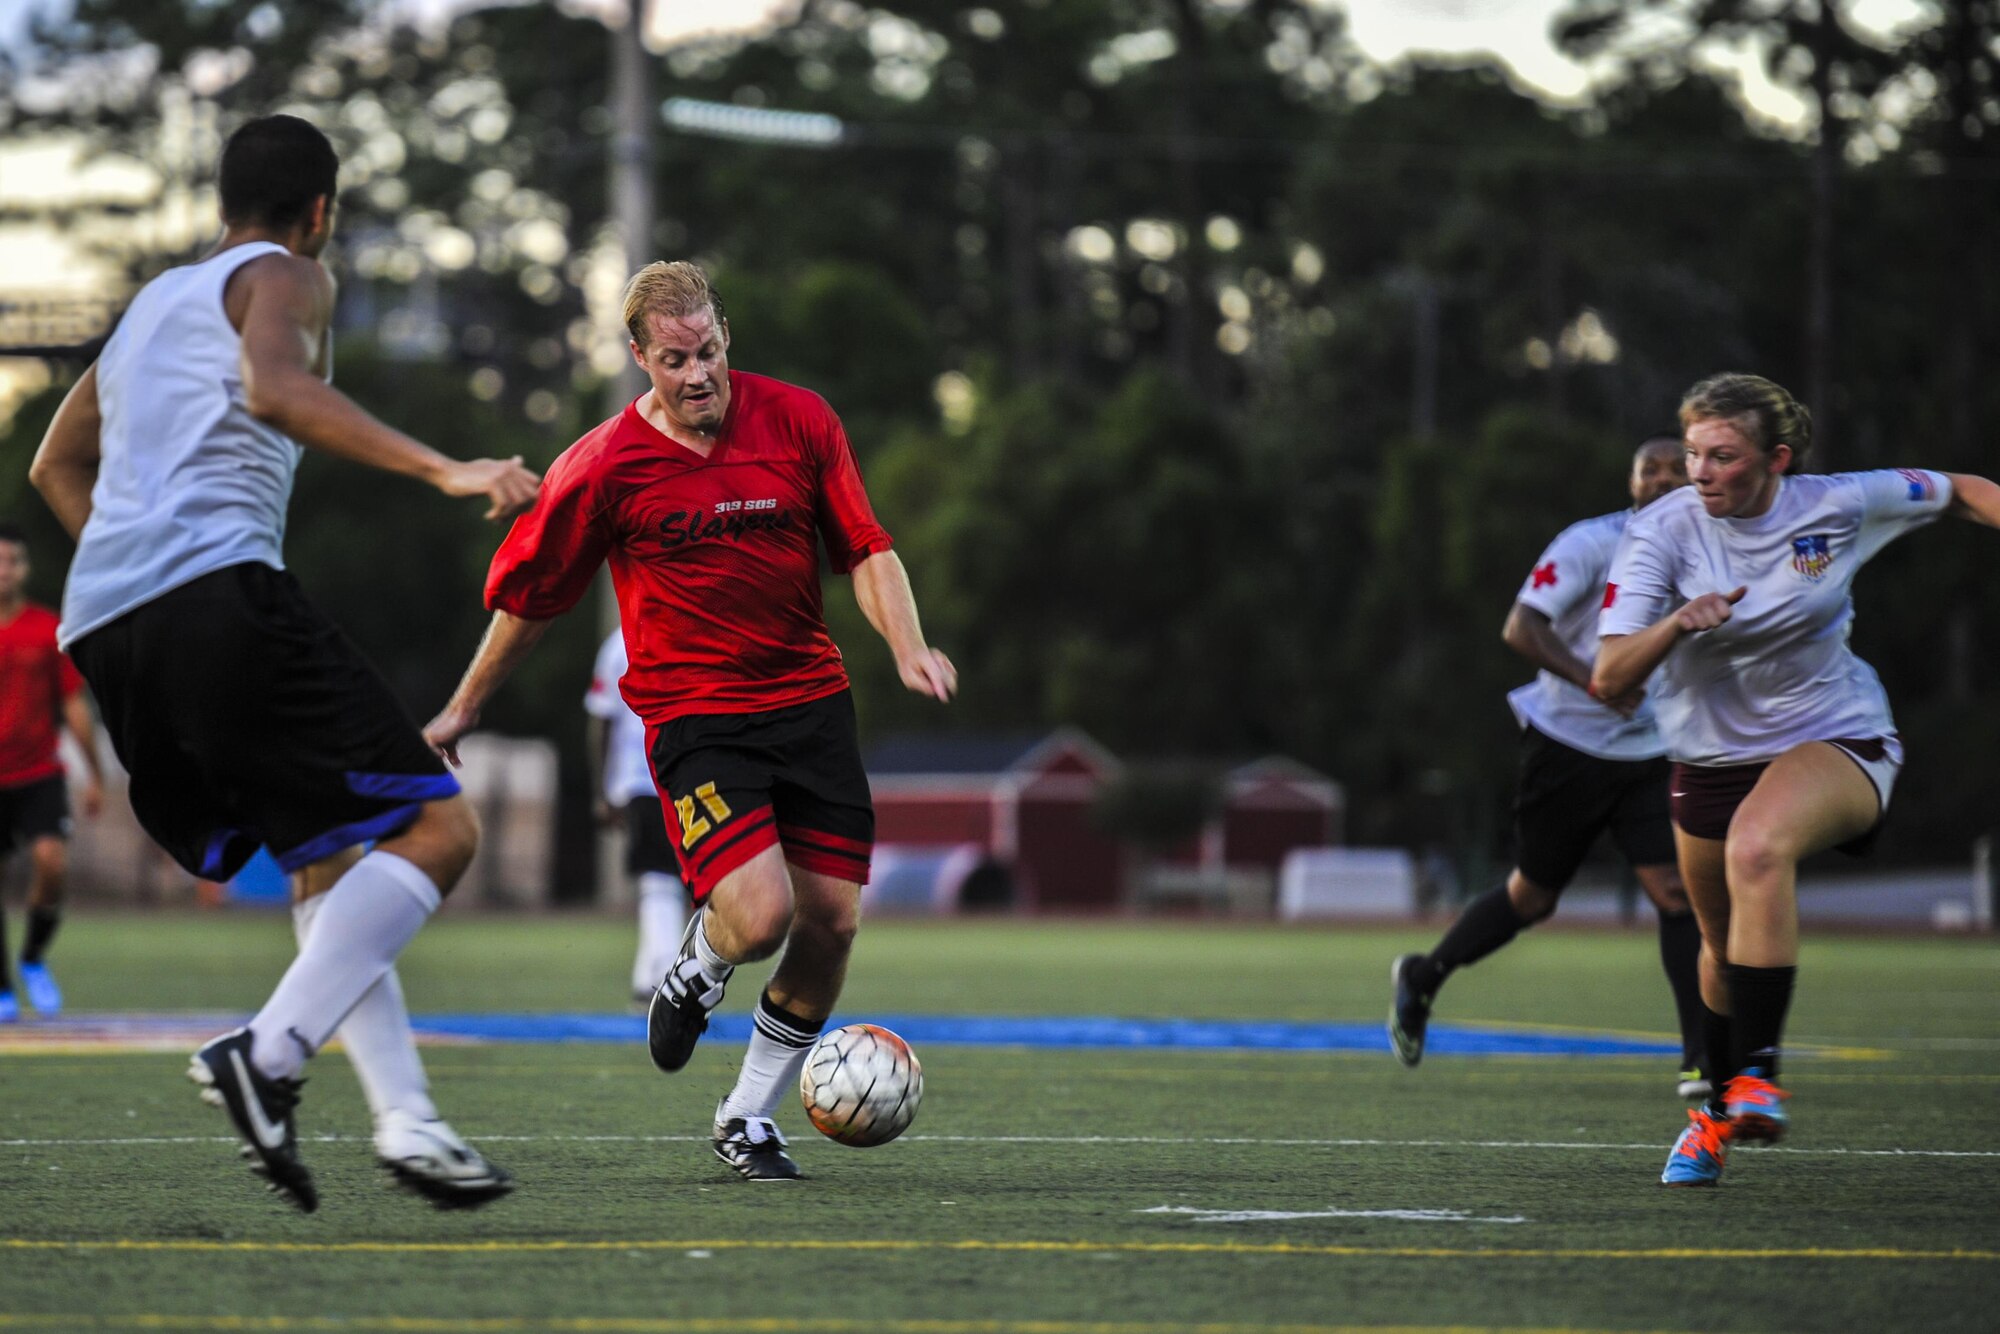 Brian Ersnt, a member of the 319th Special Operations Squadron’s intramural soccer team, dribbles a soccer ball up field during the 2016 Intramural Soccer Championship at Hurlburt Field, Fla., Sept. 13, 2016. The 319th SOS was undefeated all season until the 1st Special Operations Medical Group defeated them in a double elimination during the championship game. (U.S. Air Force photo by Airman 1st Class Joseph Pick)